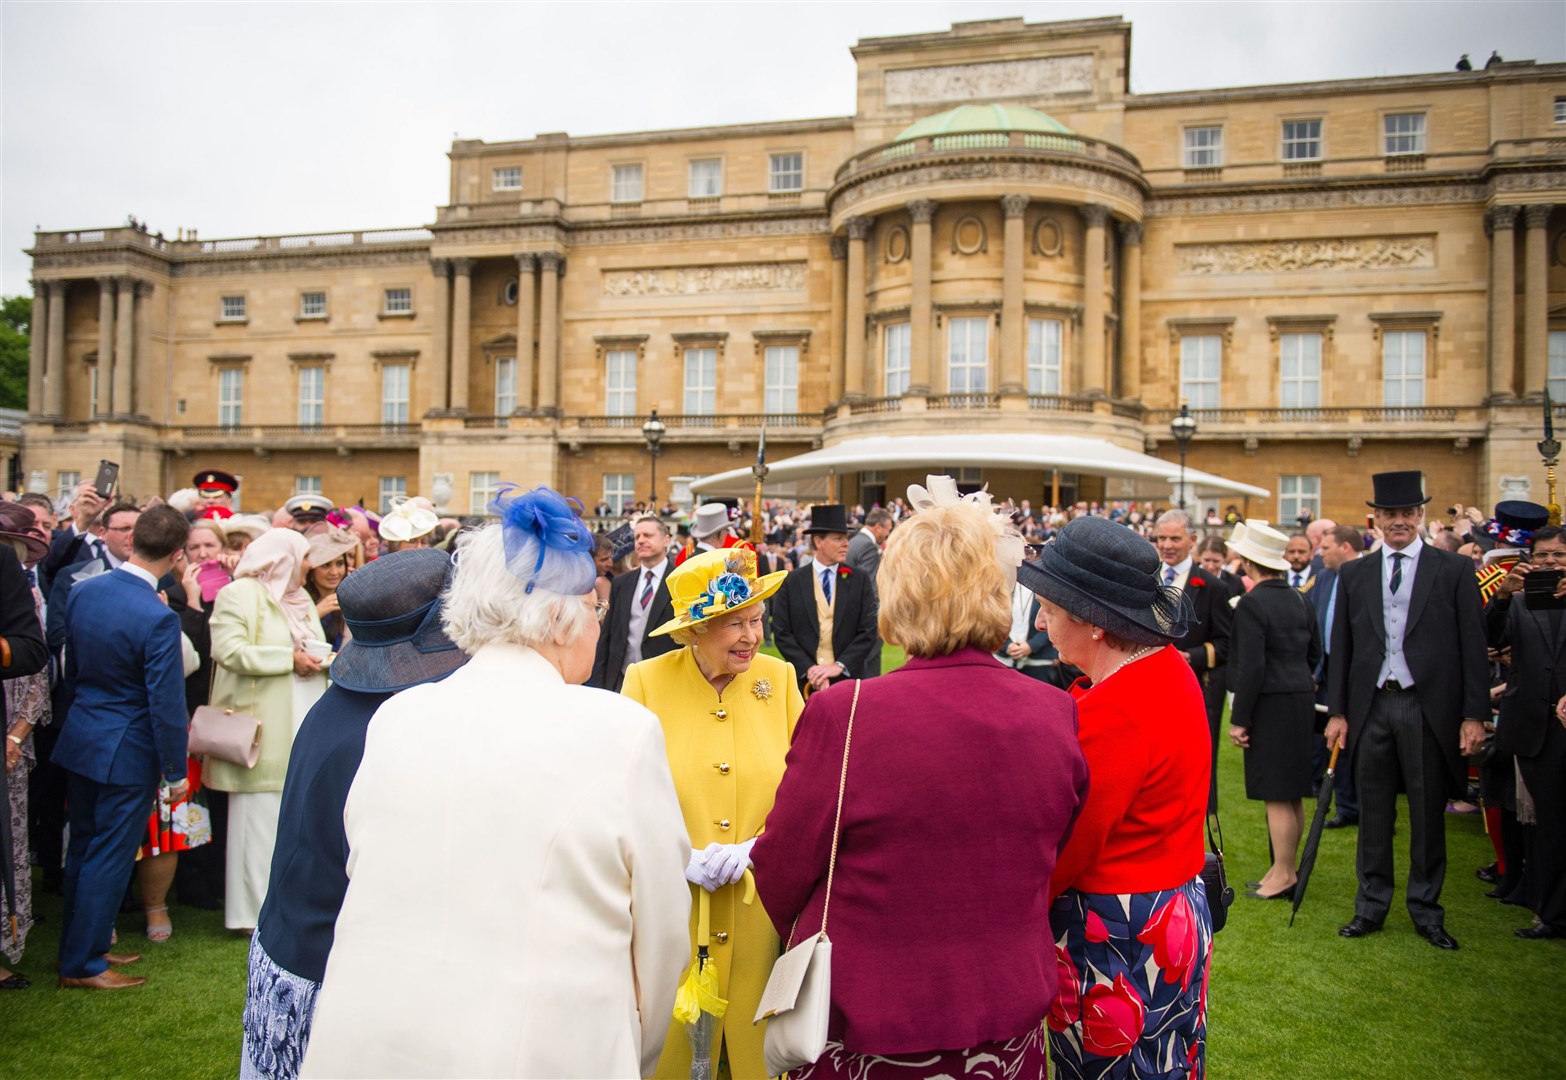 The Queen greets guests during a garden party at Buckingham Palace (Dominic Lipinski/PA)